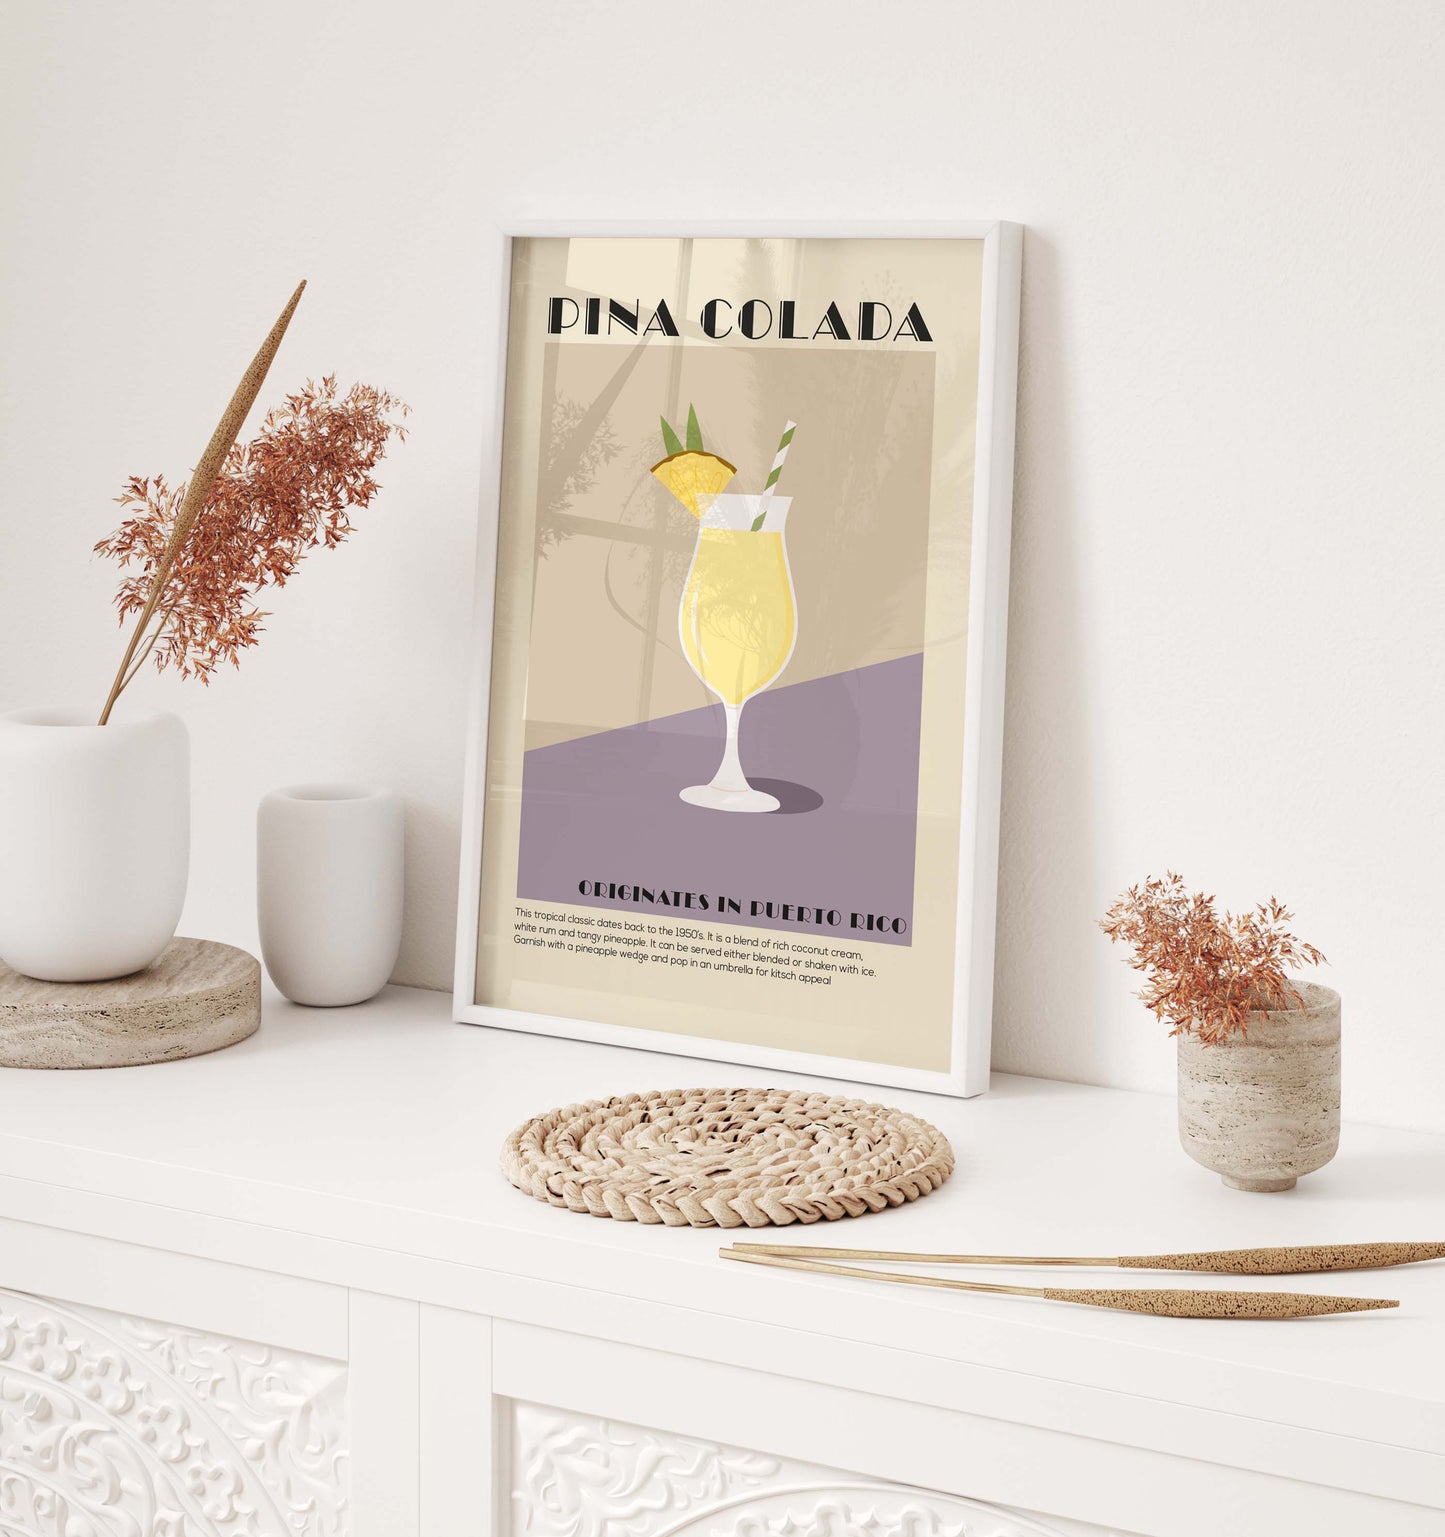 Art deco style kitchen print for Pina colada cocktails